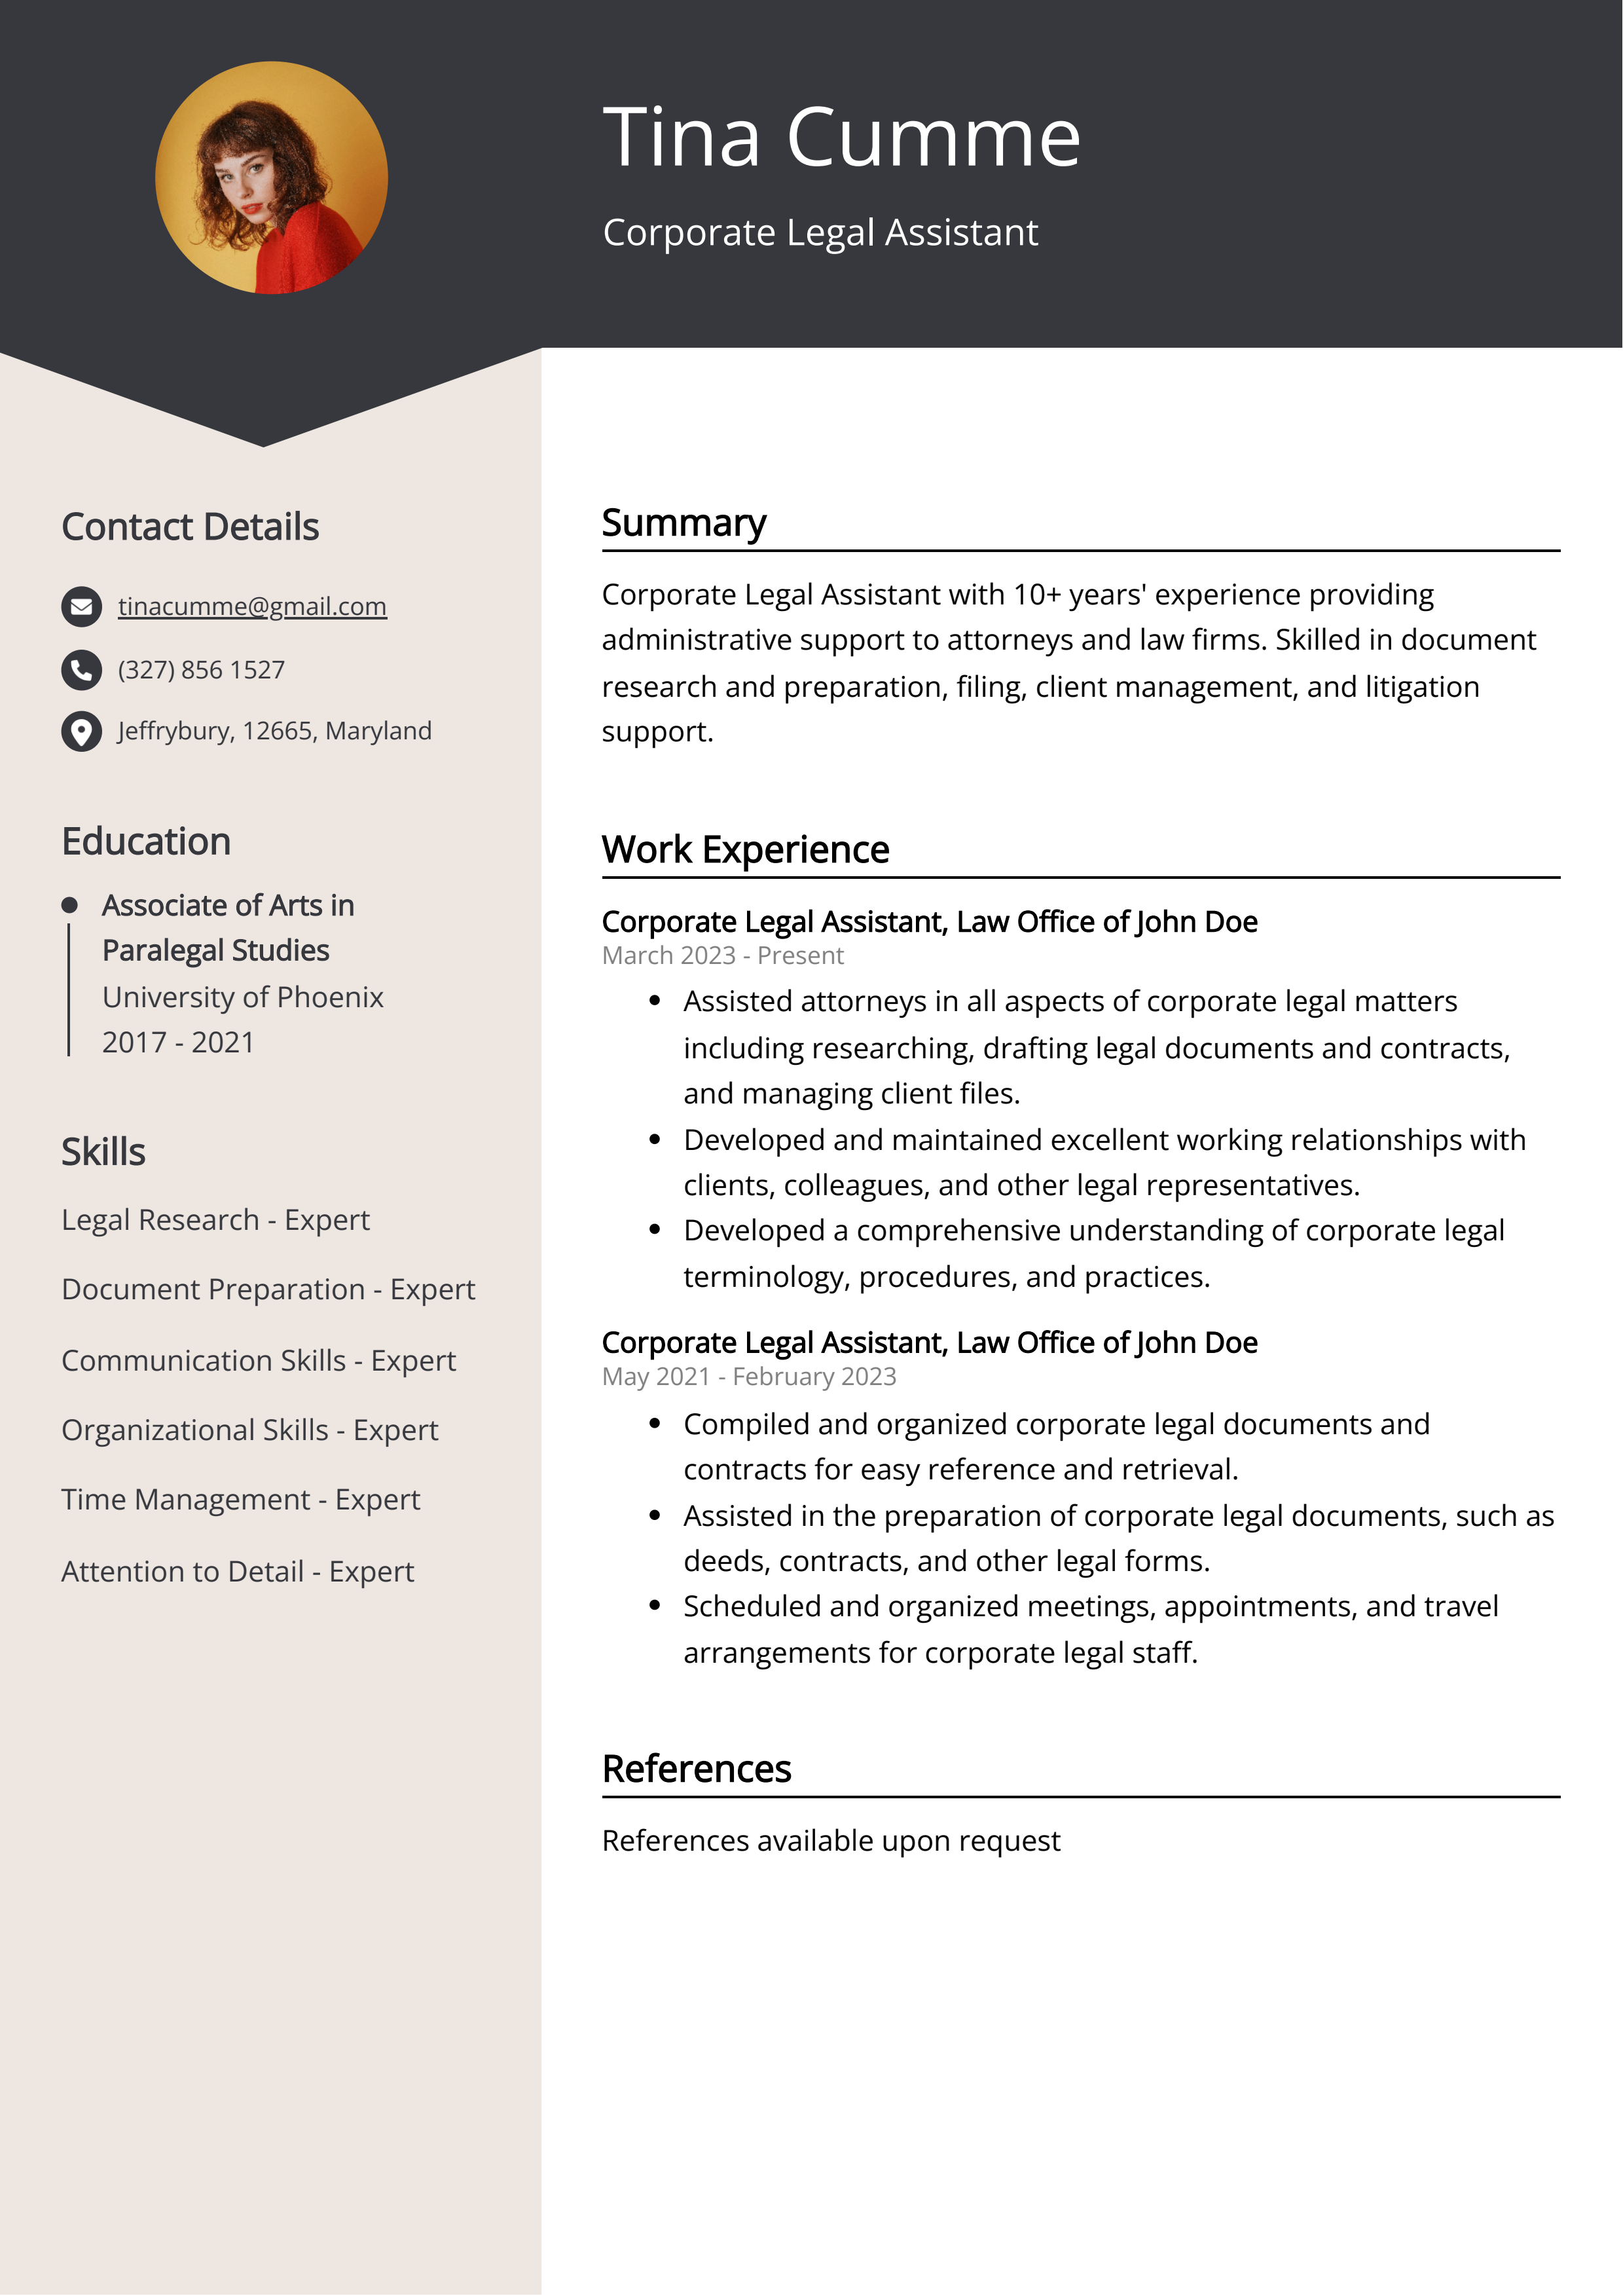 Corporate Legal Assistant CV Example